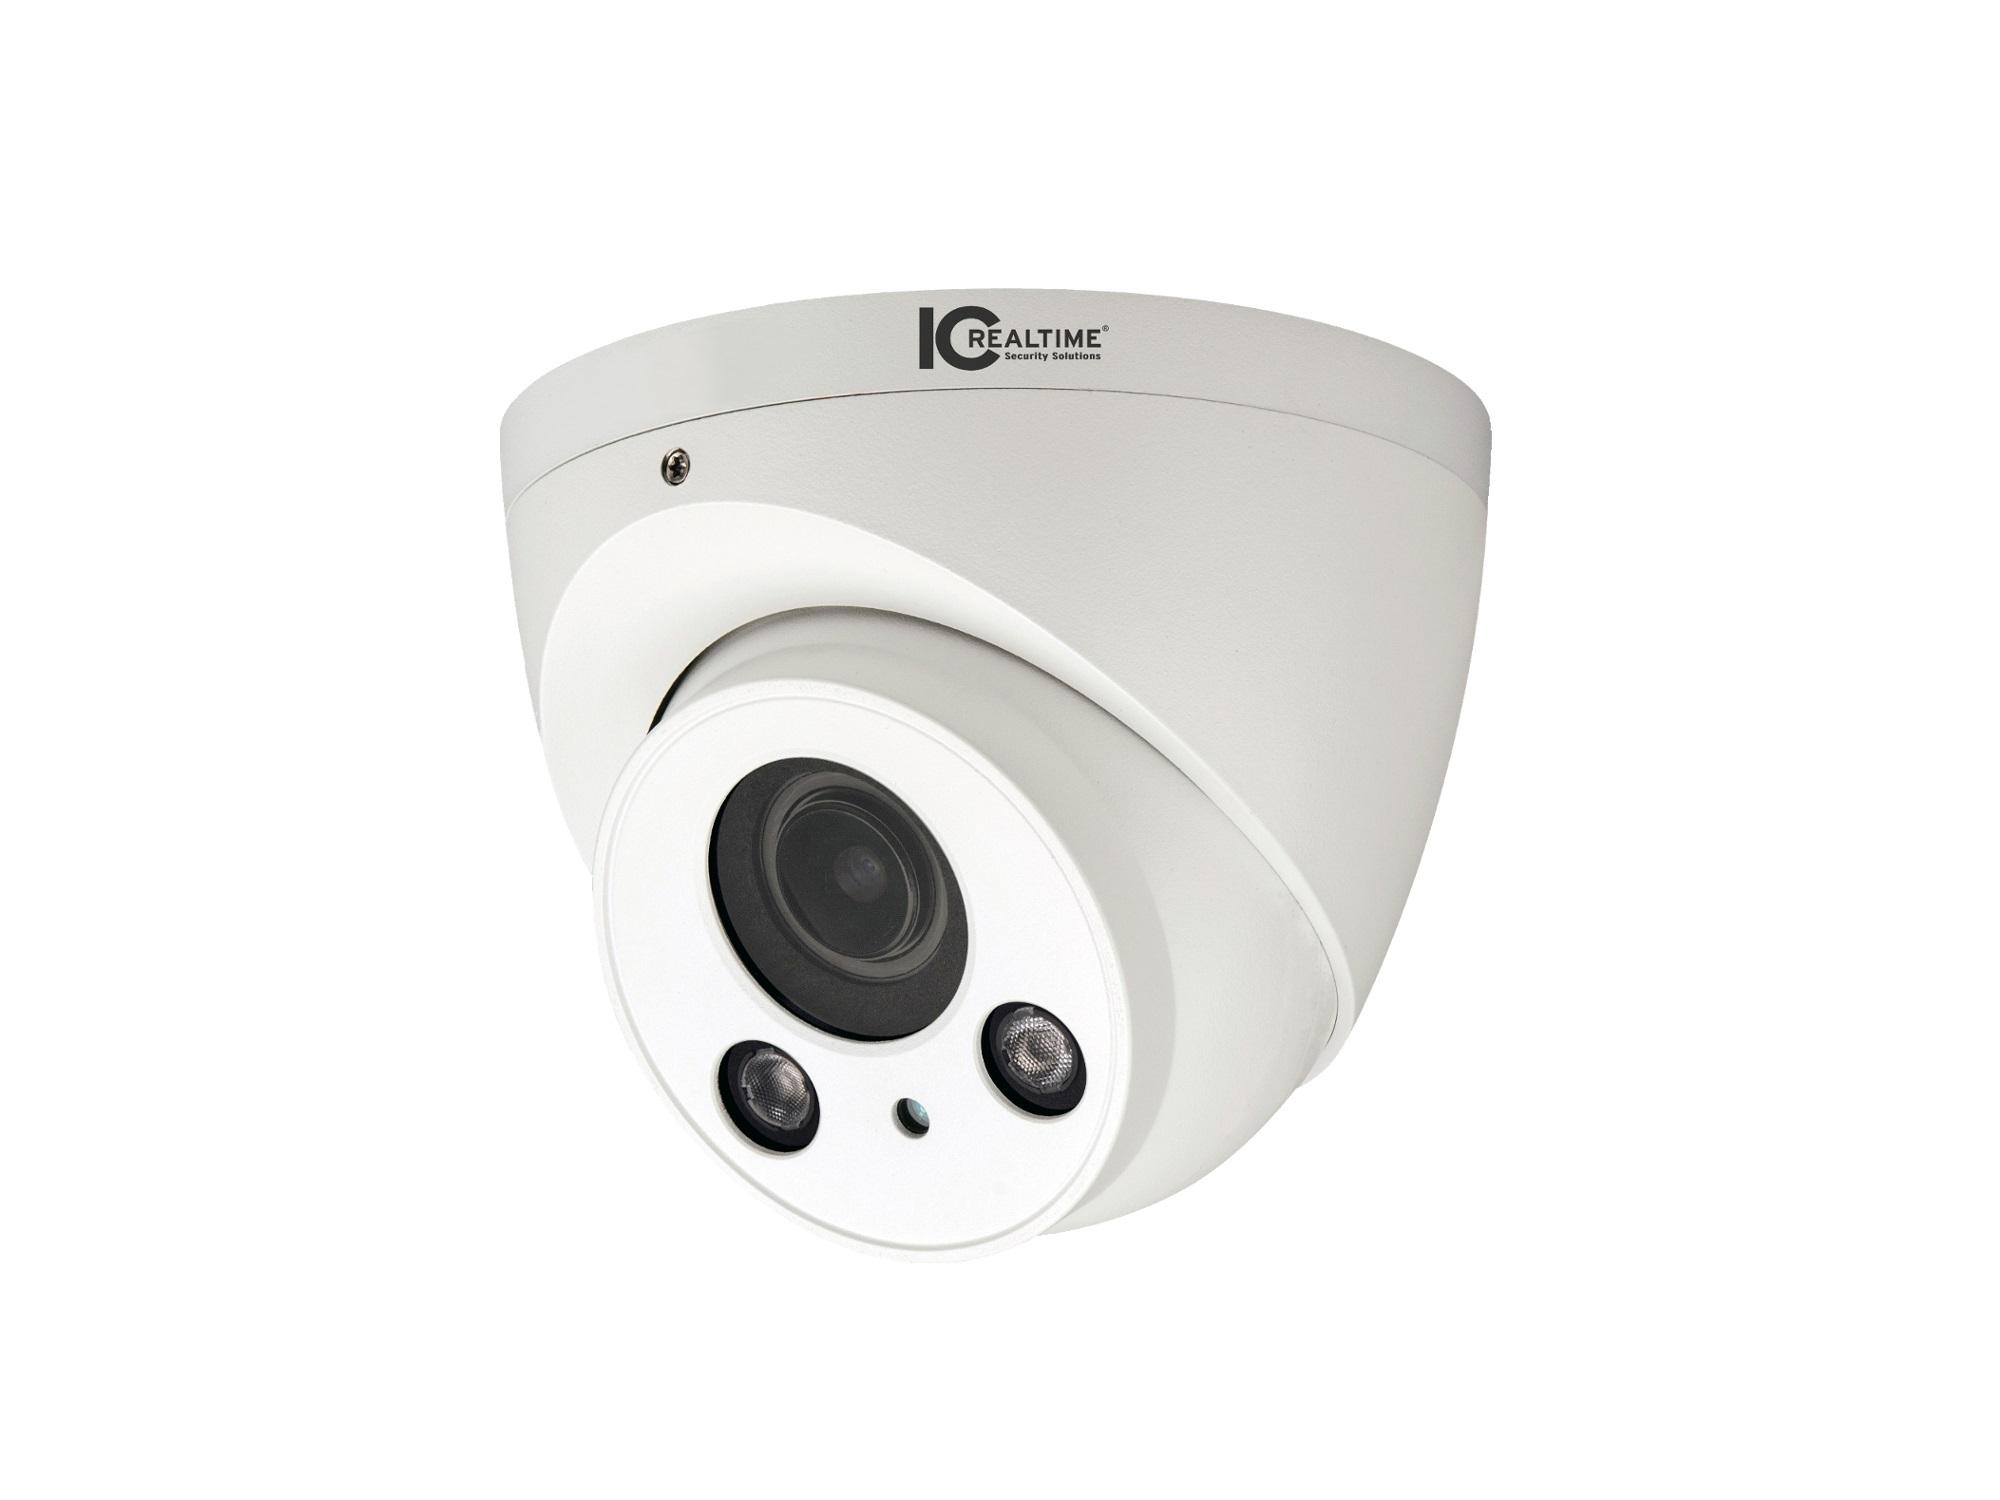 ICRealtime ICR-300H4W 2 MP Indoor/Outdoor Mid-Size IR HDAVS Dome Camera/White